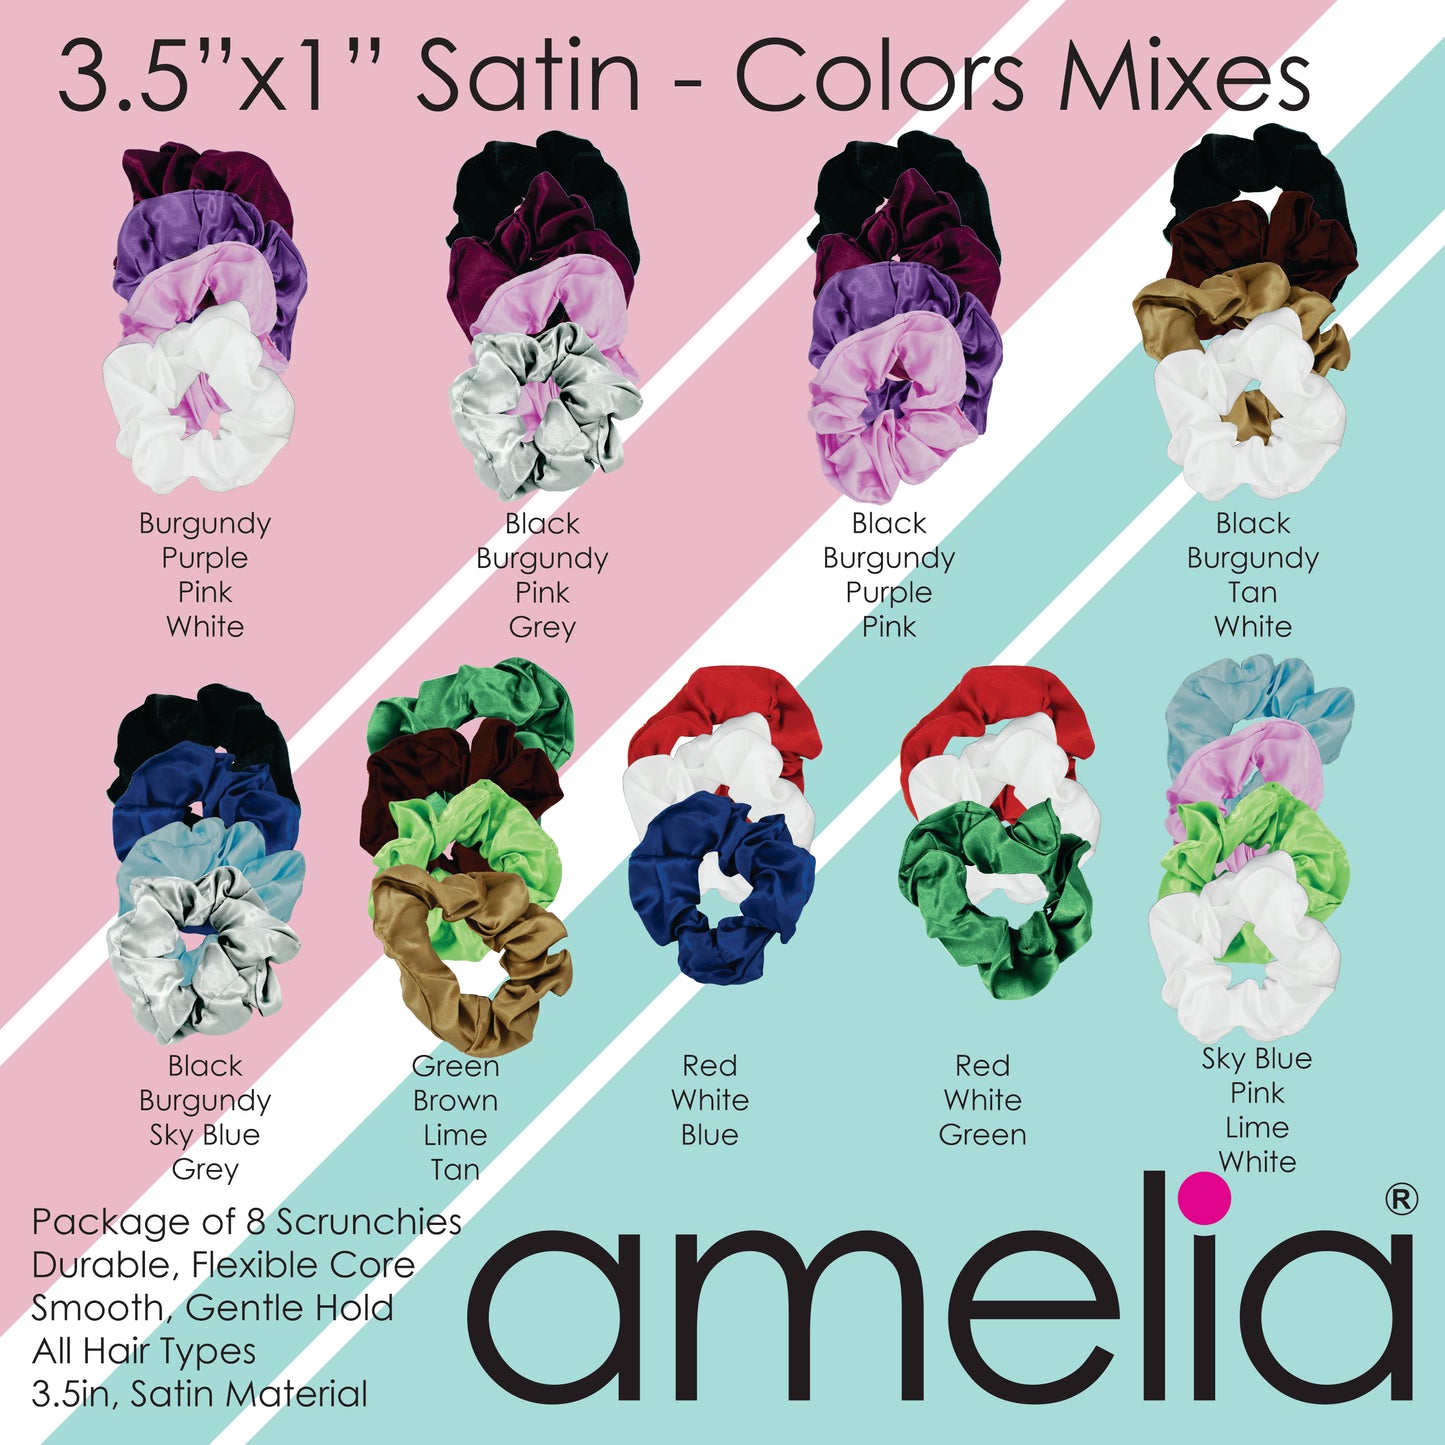 Amelia Beauty Products, Brown Satin Scrunchies, 3.5in Diameter, Gentle on Hair, Strong Hold, No Snag, No Dents or Creases. 8 Pack